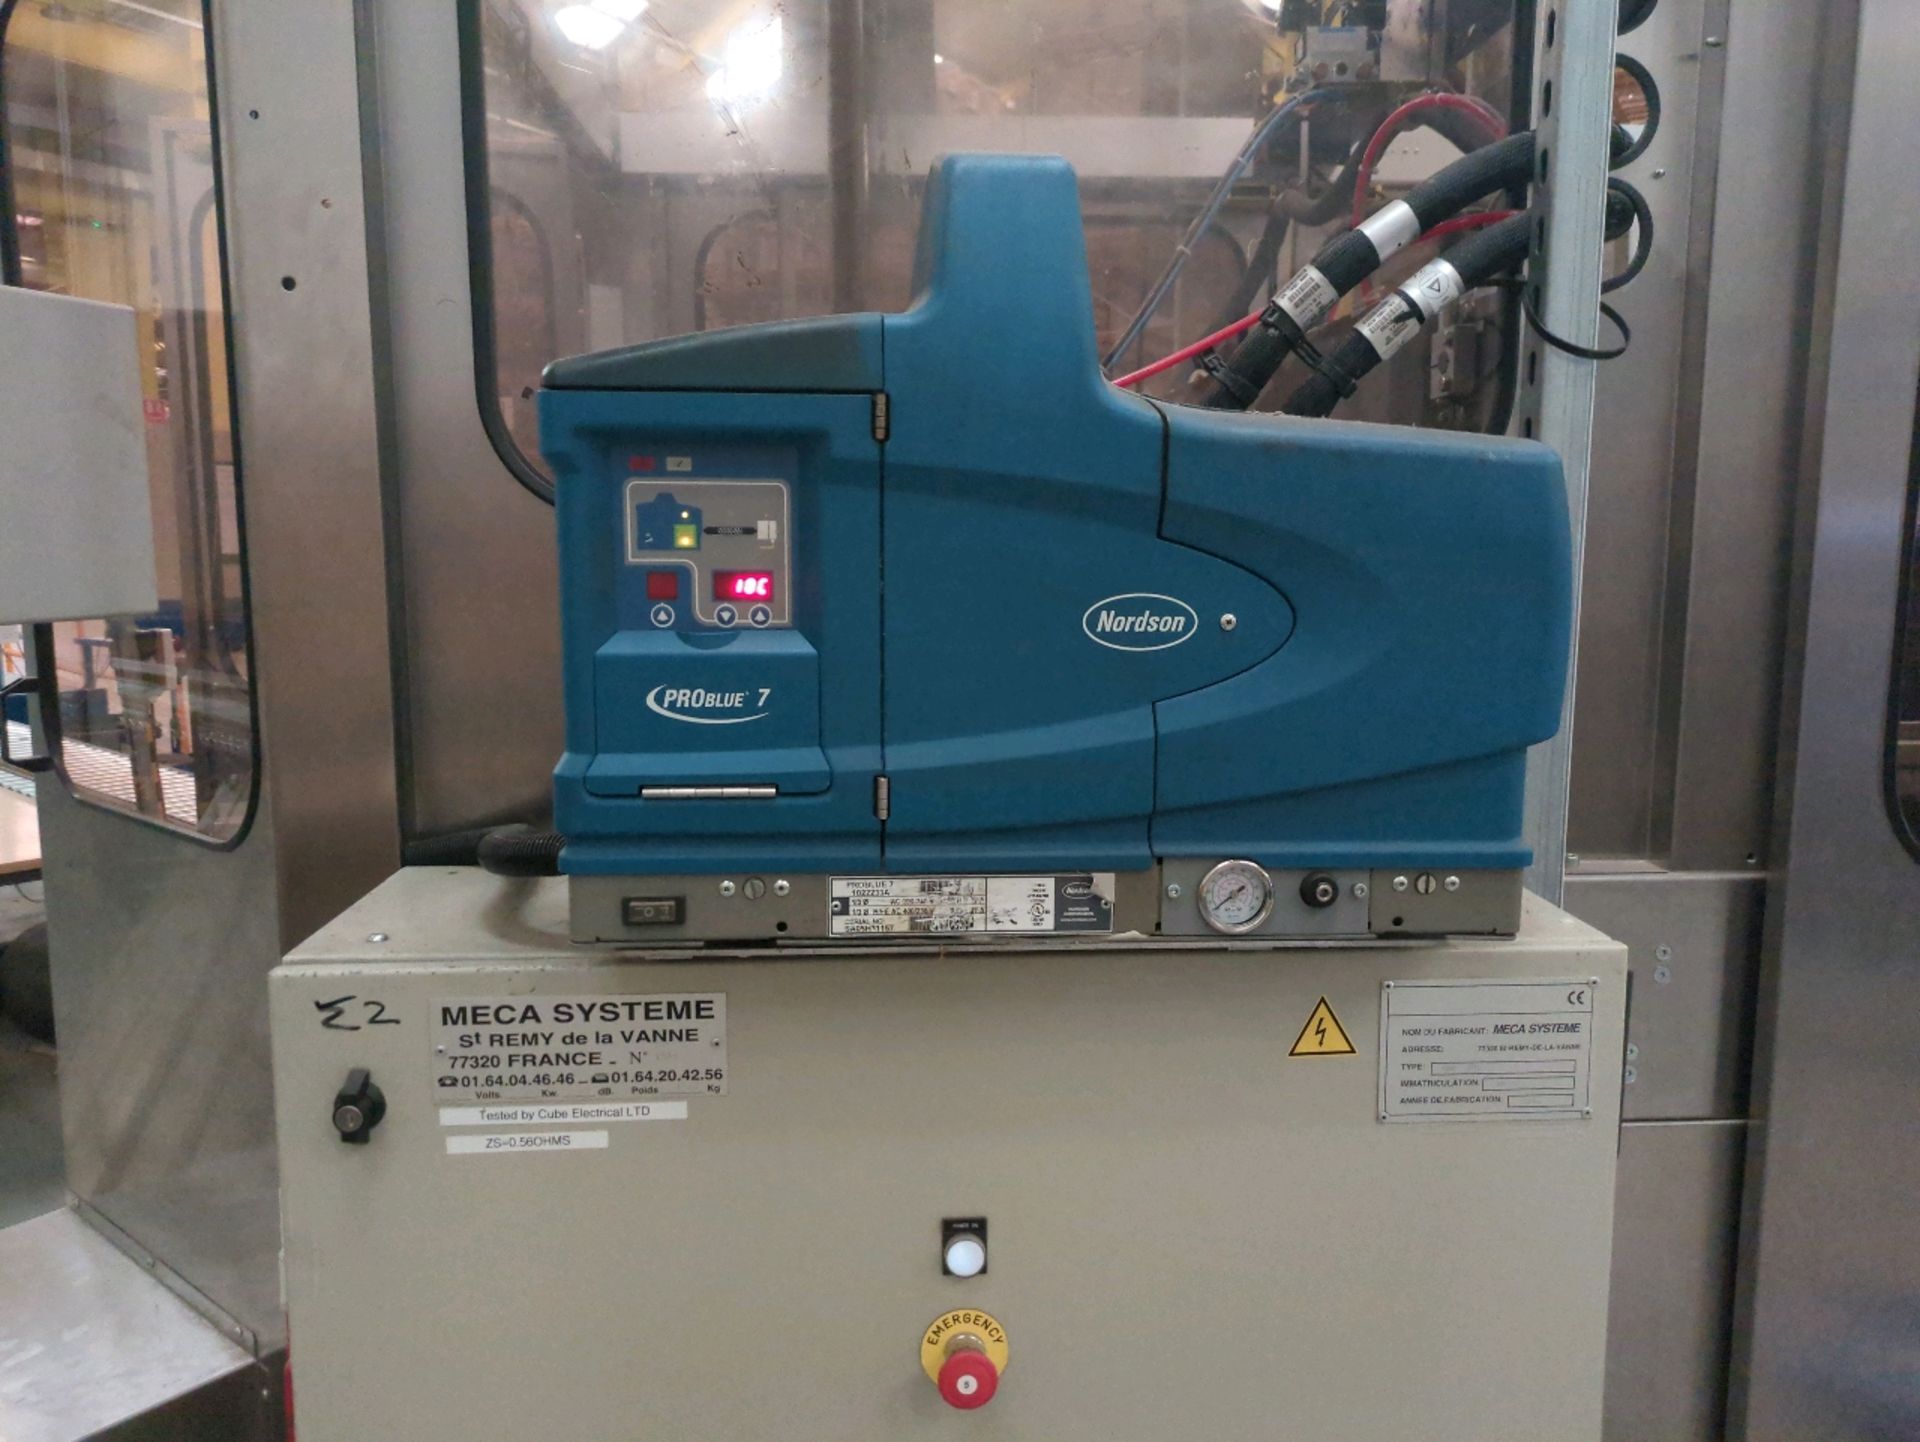 Meca Systeme BMF 305 Nordson PROblue7 - Image 21 of 23